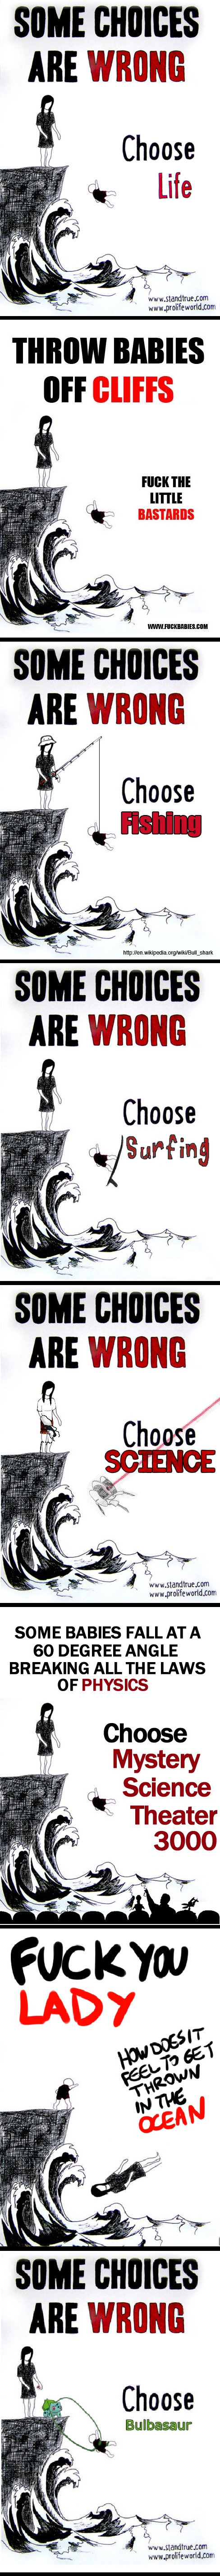 Choices.+choose+wisely_9a095a_4867894.jpg